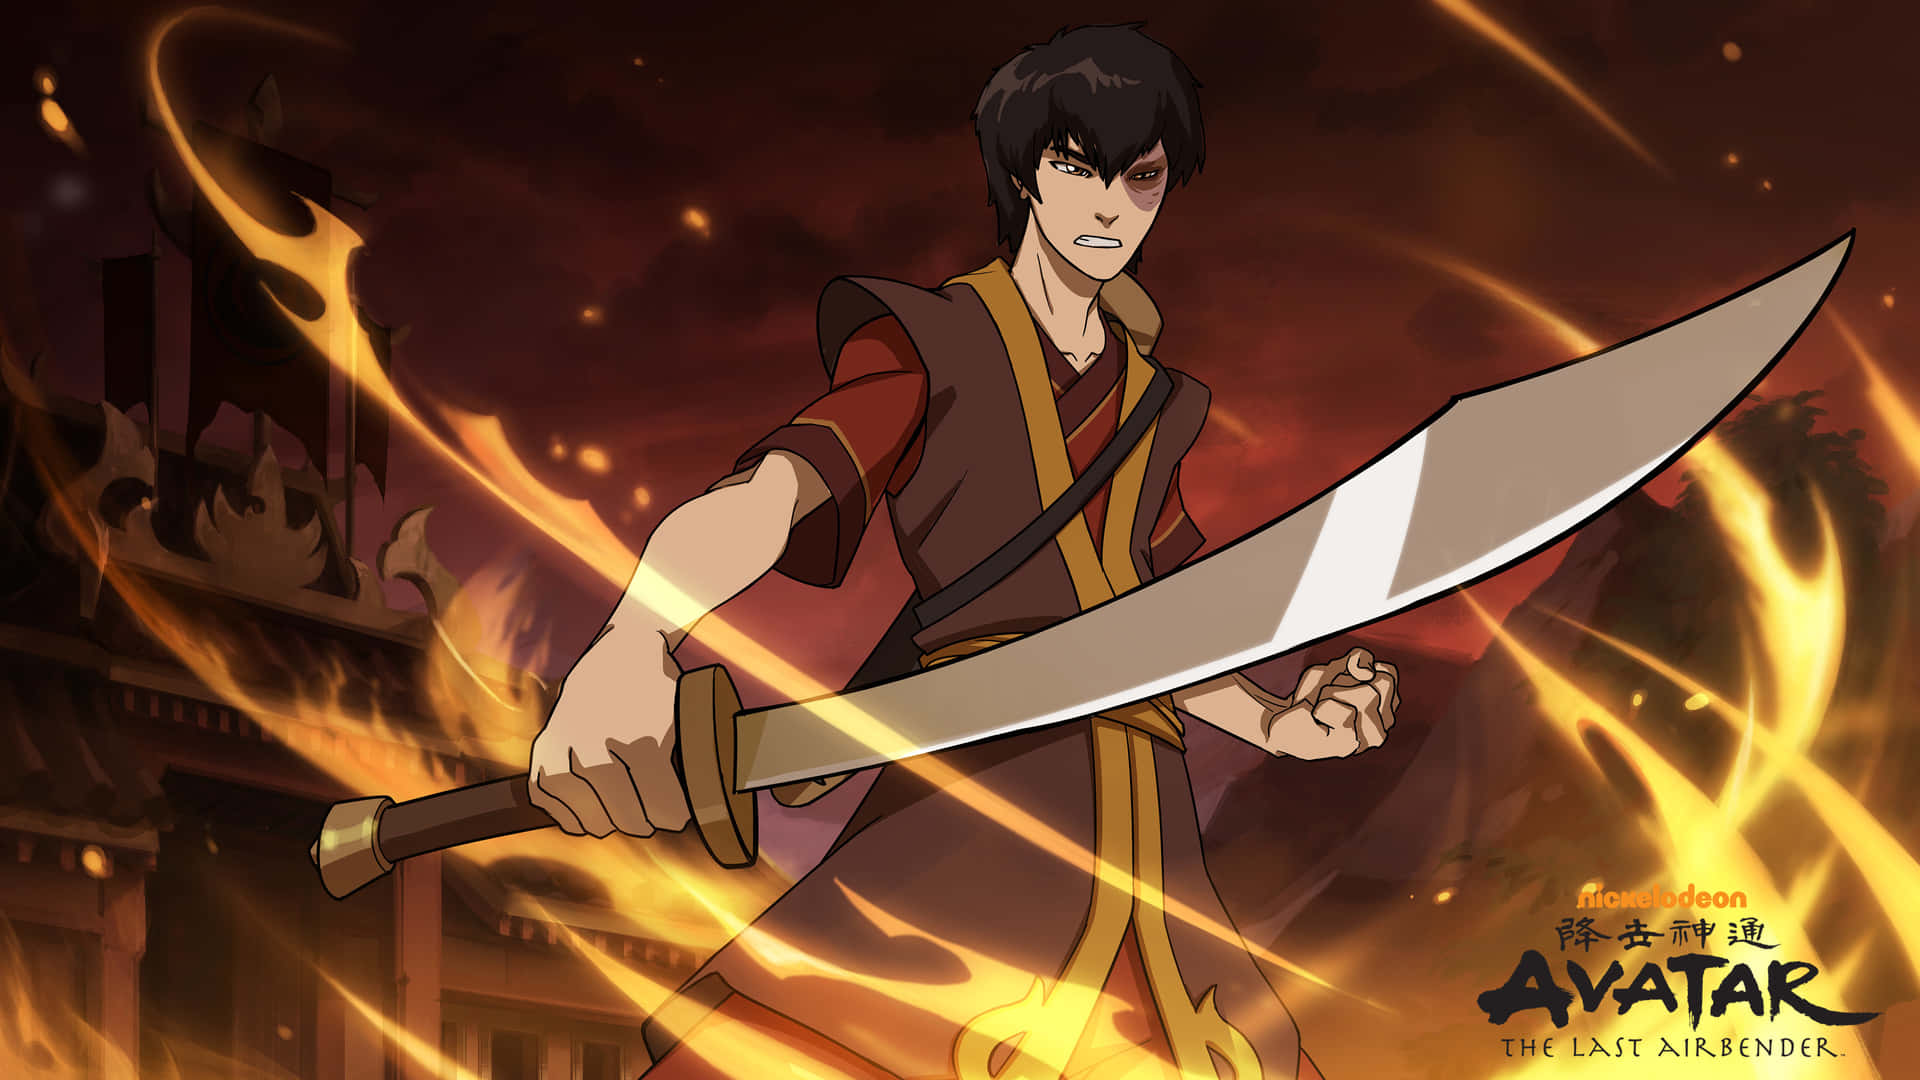 Fire Lord Zuko embraces his Avatar State power